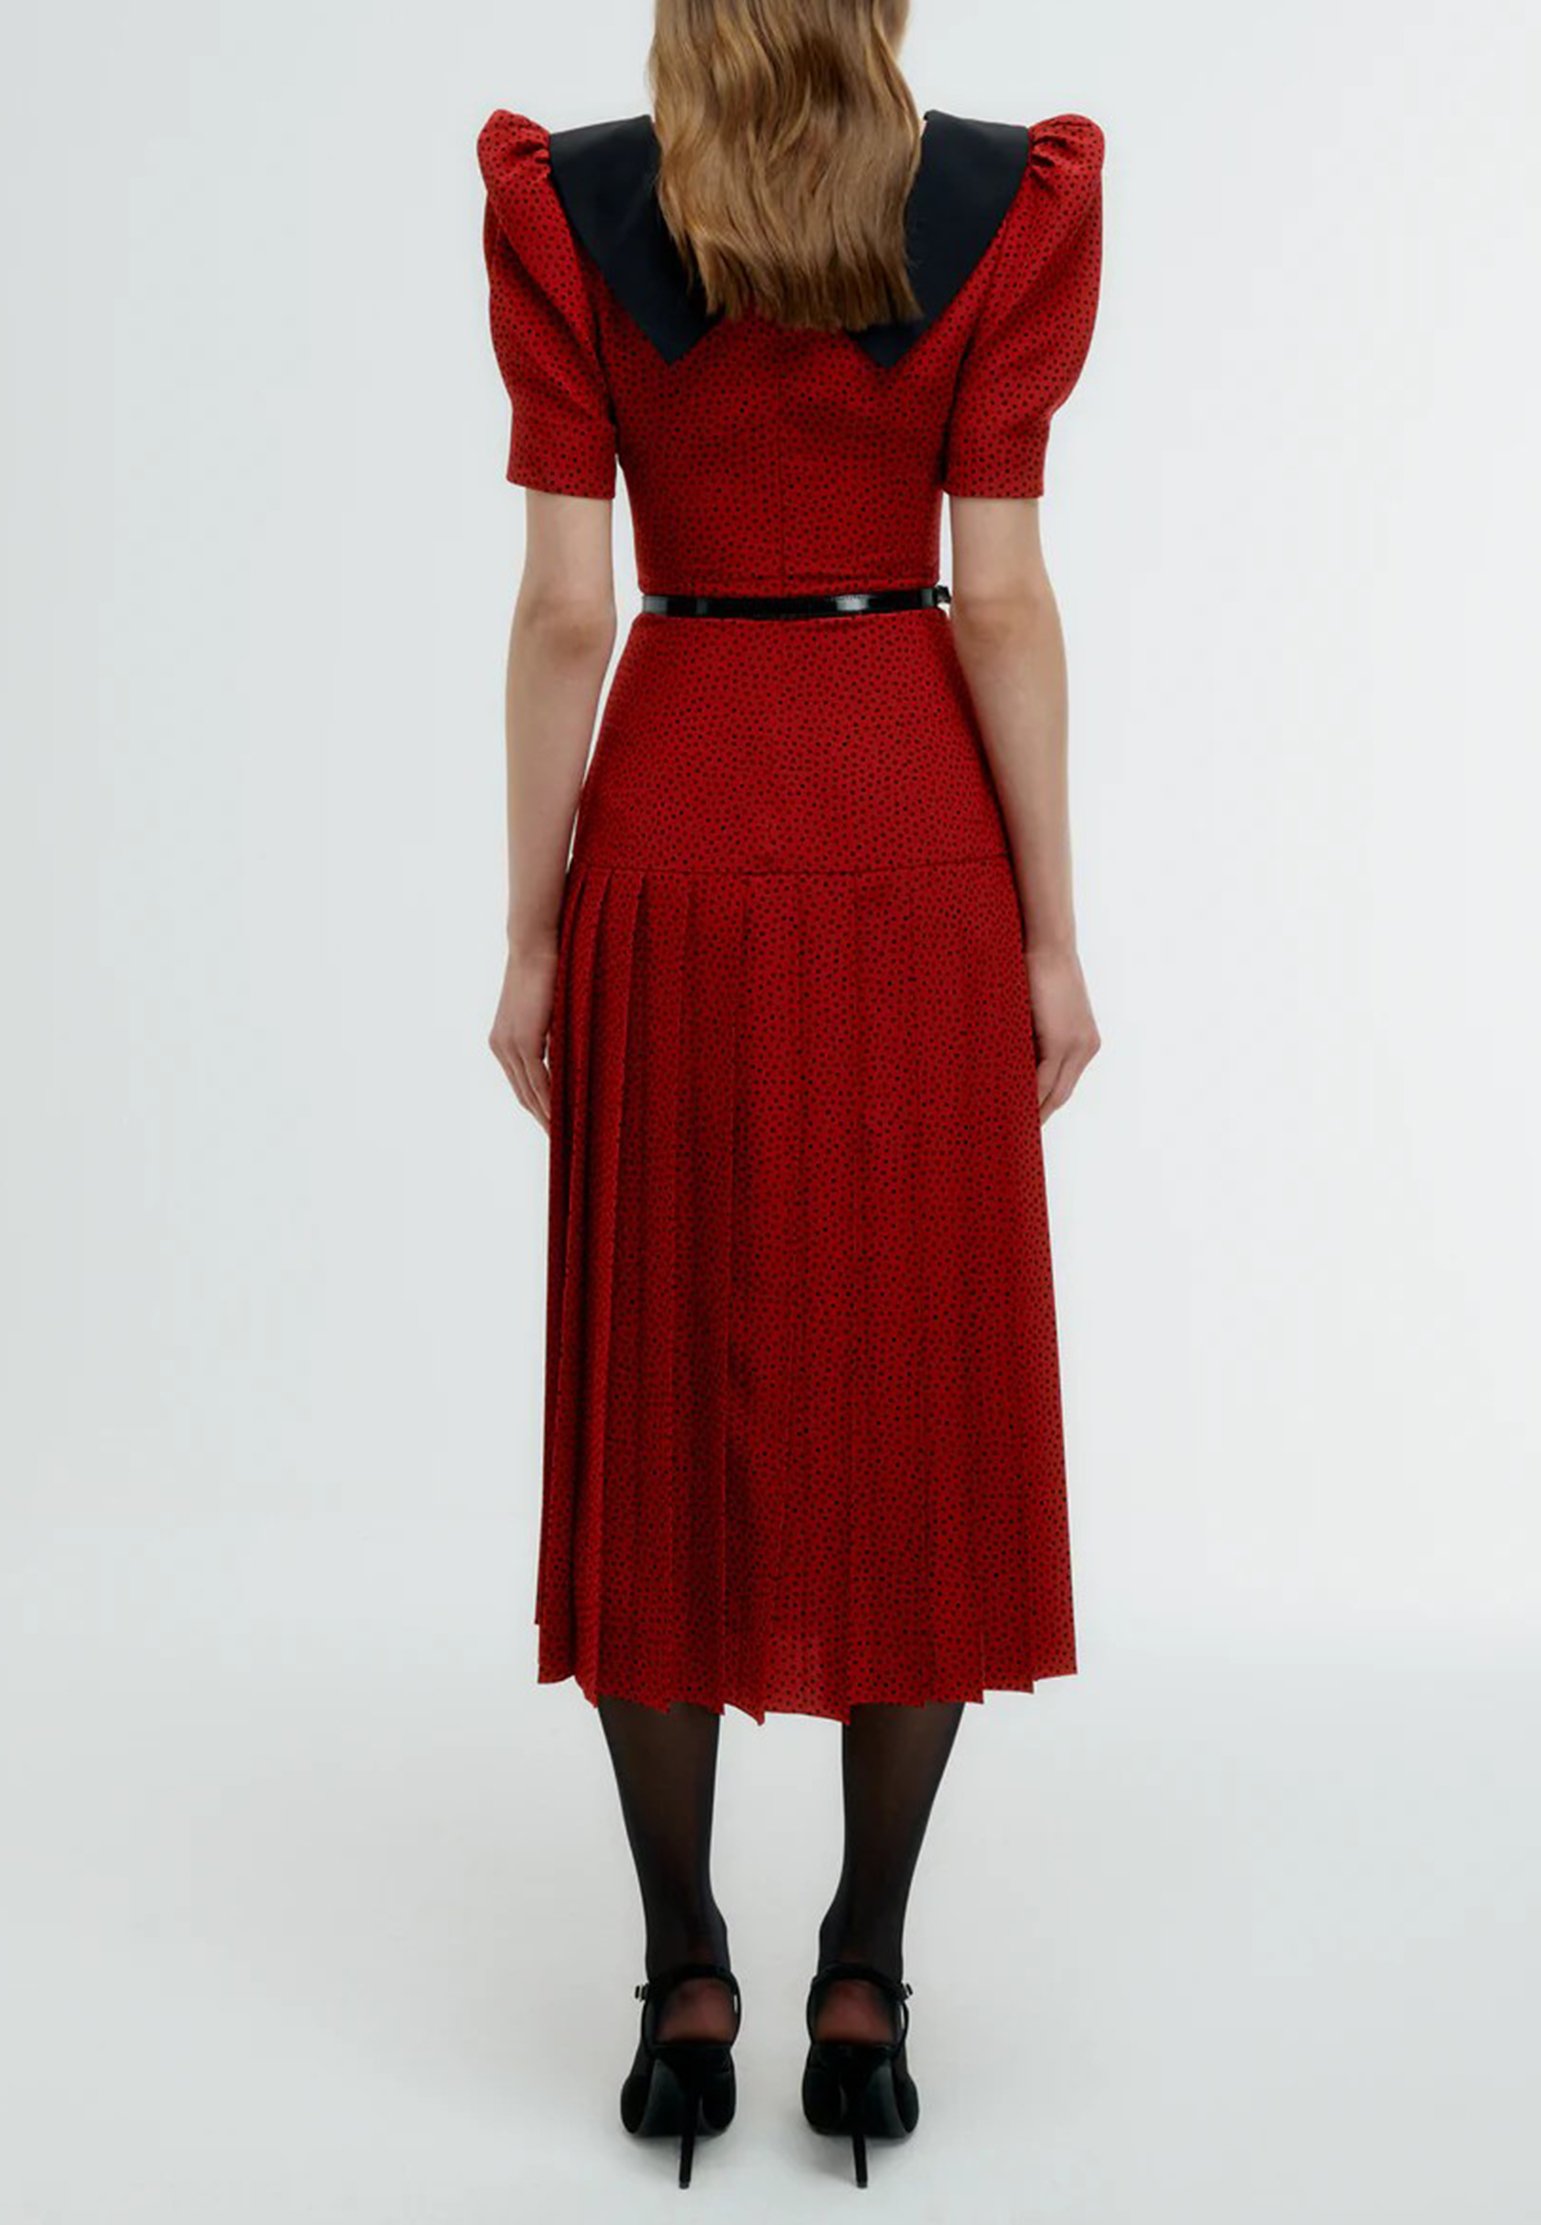 Dress ALESSANDRA RICH Color: red (Code: 817) in online store Allure